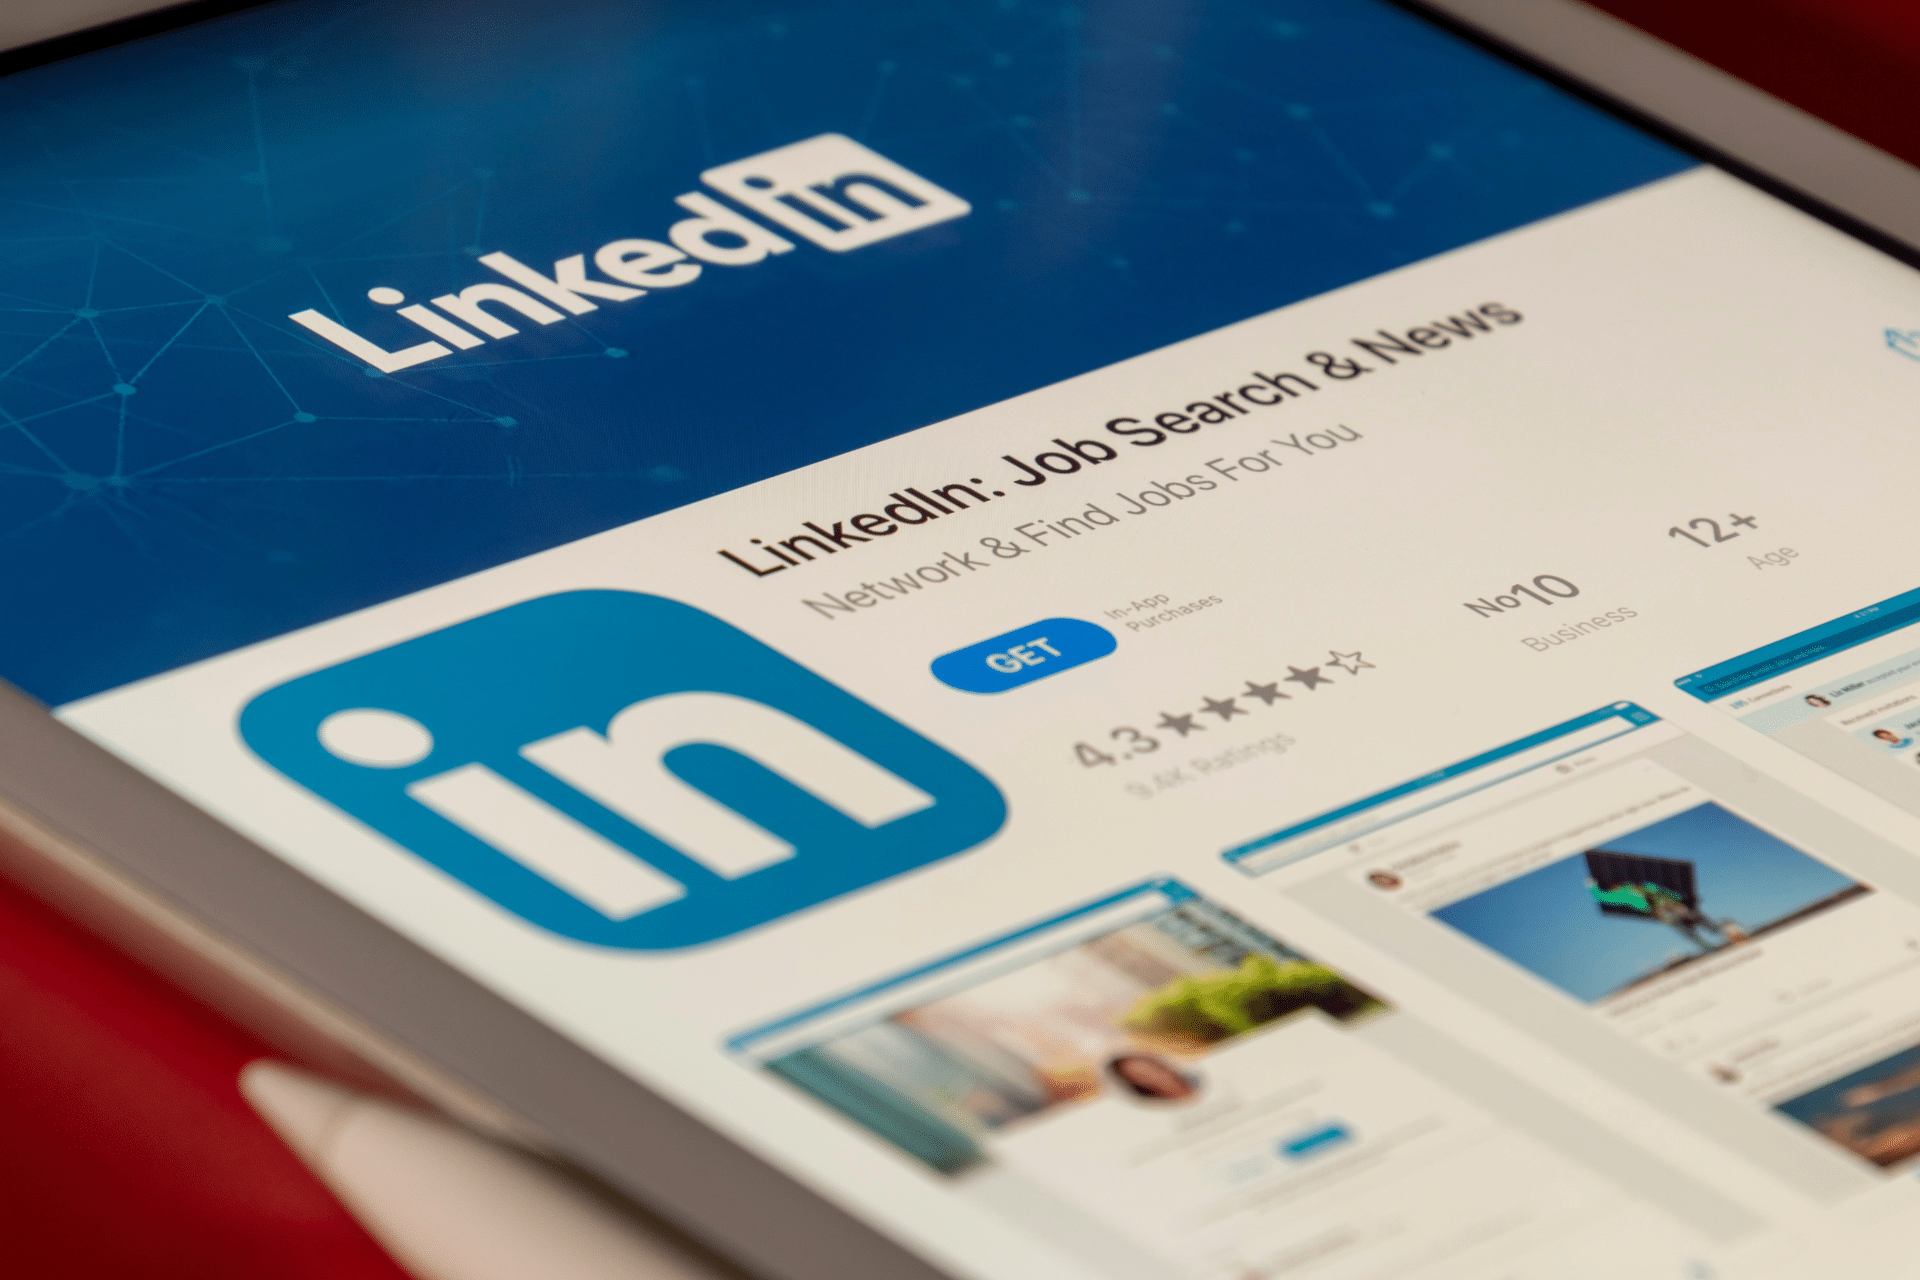 5 LinkedIn Updates You May Not Have Noticed in 2021